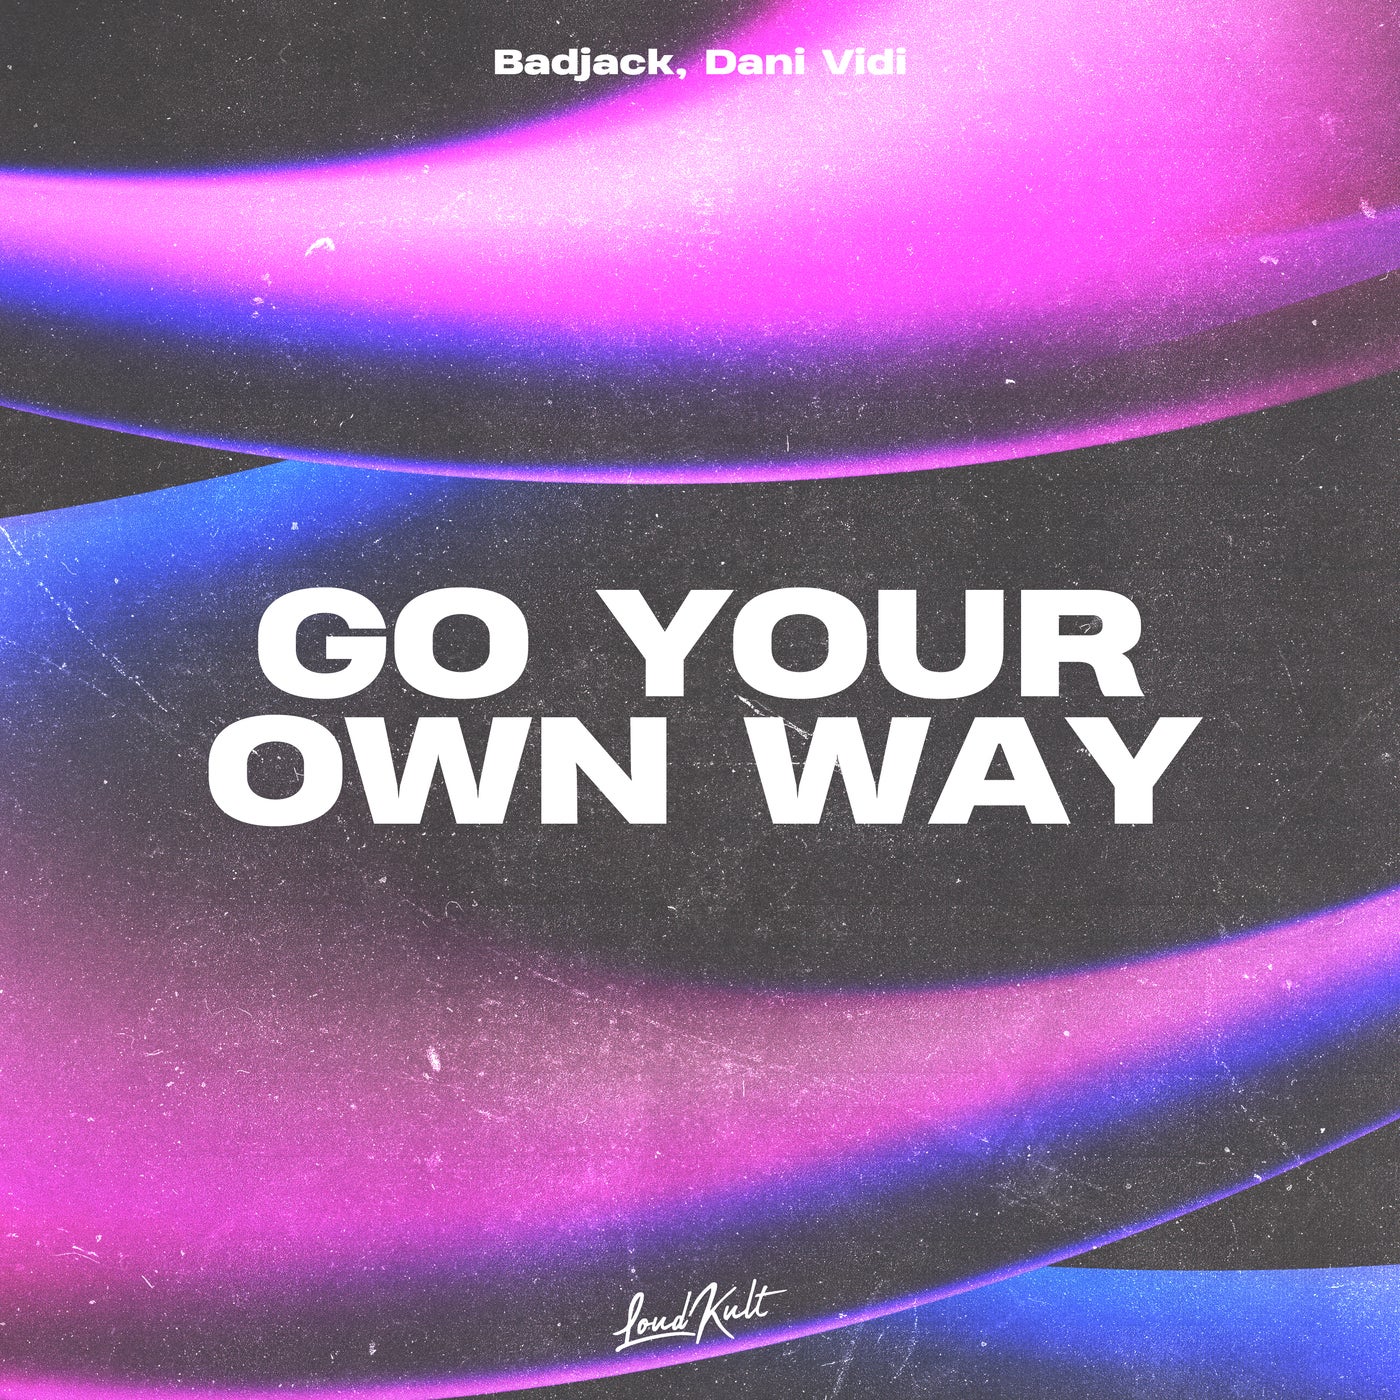 Go your own way